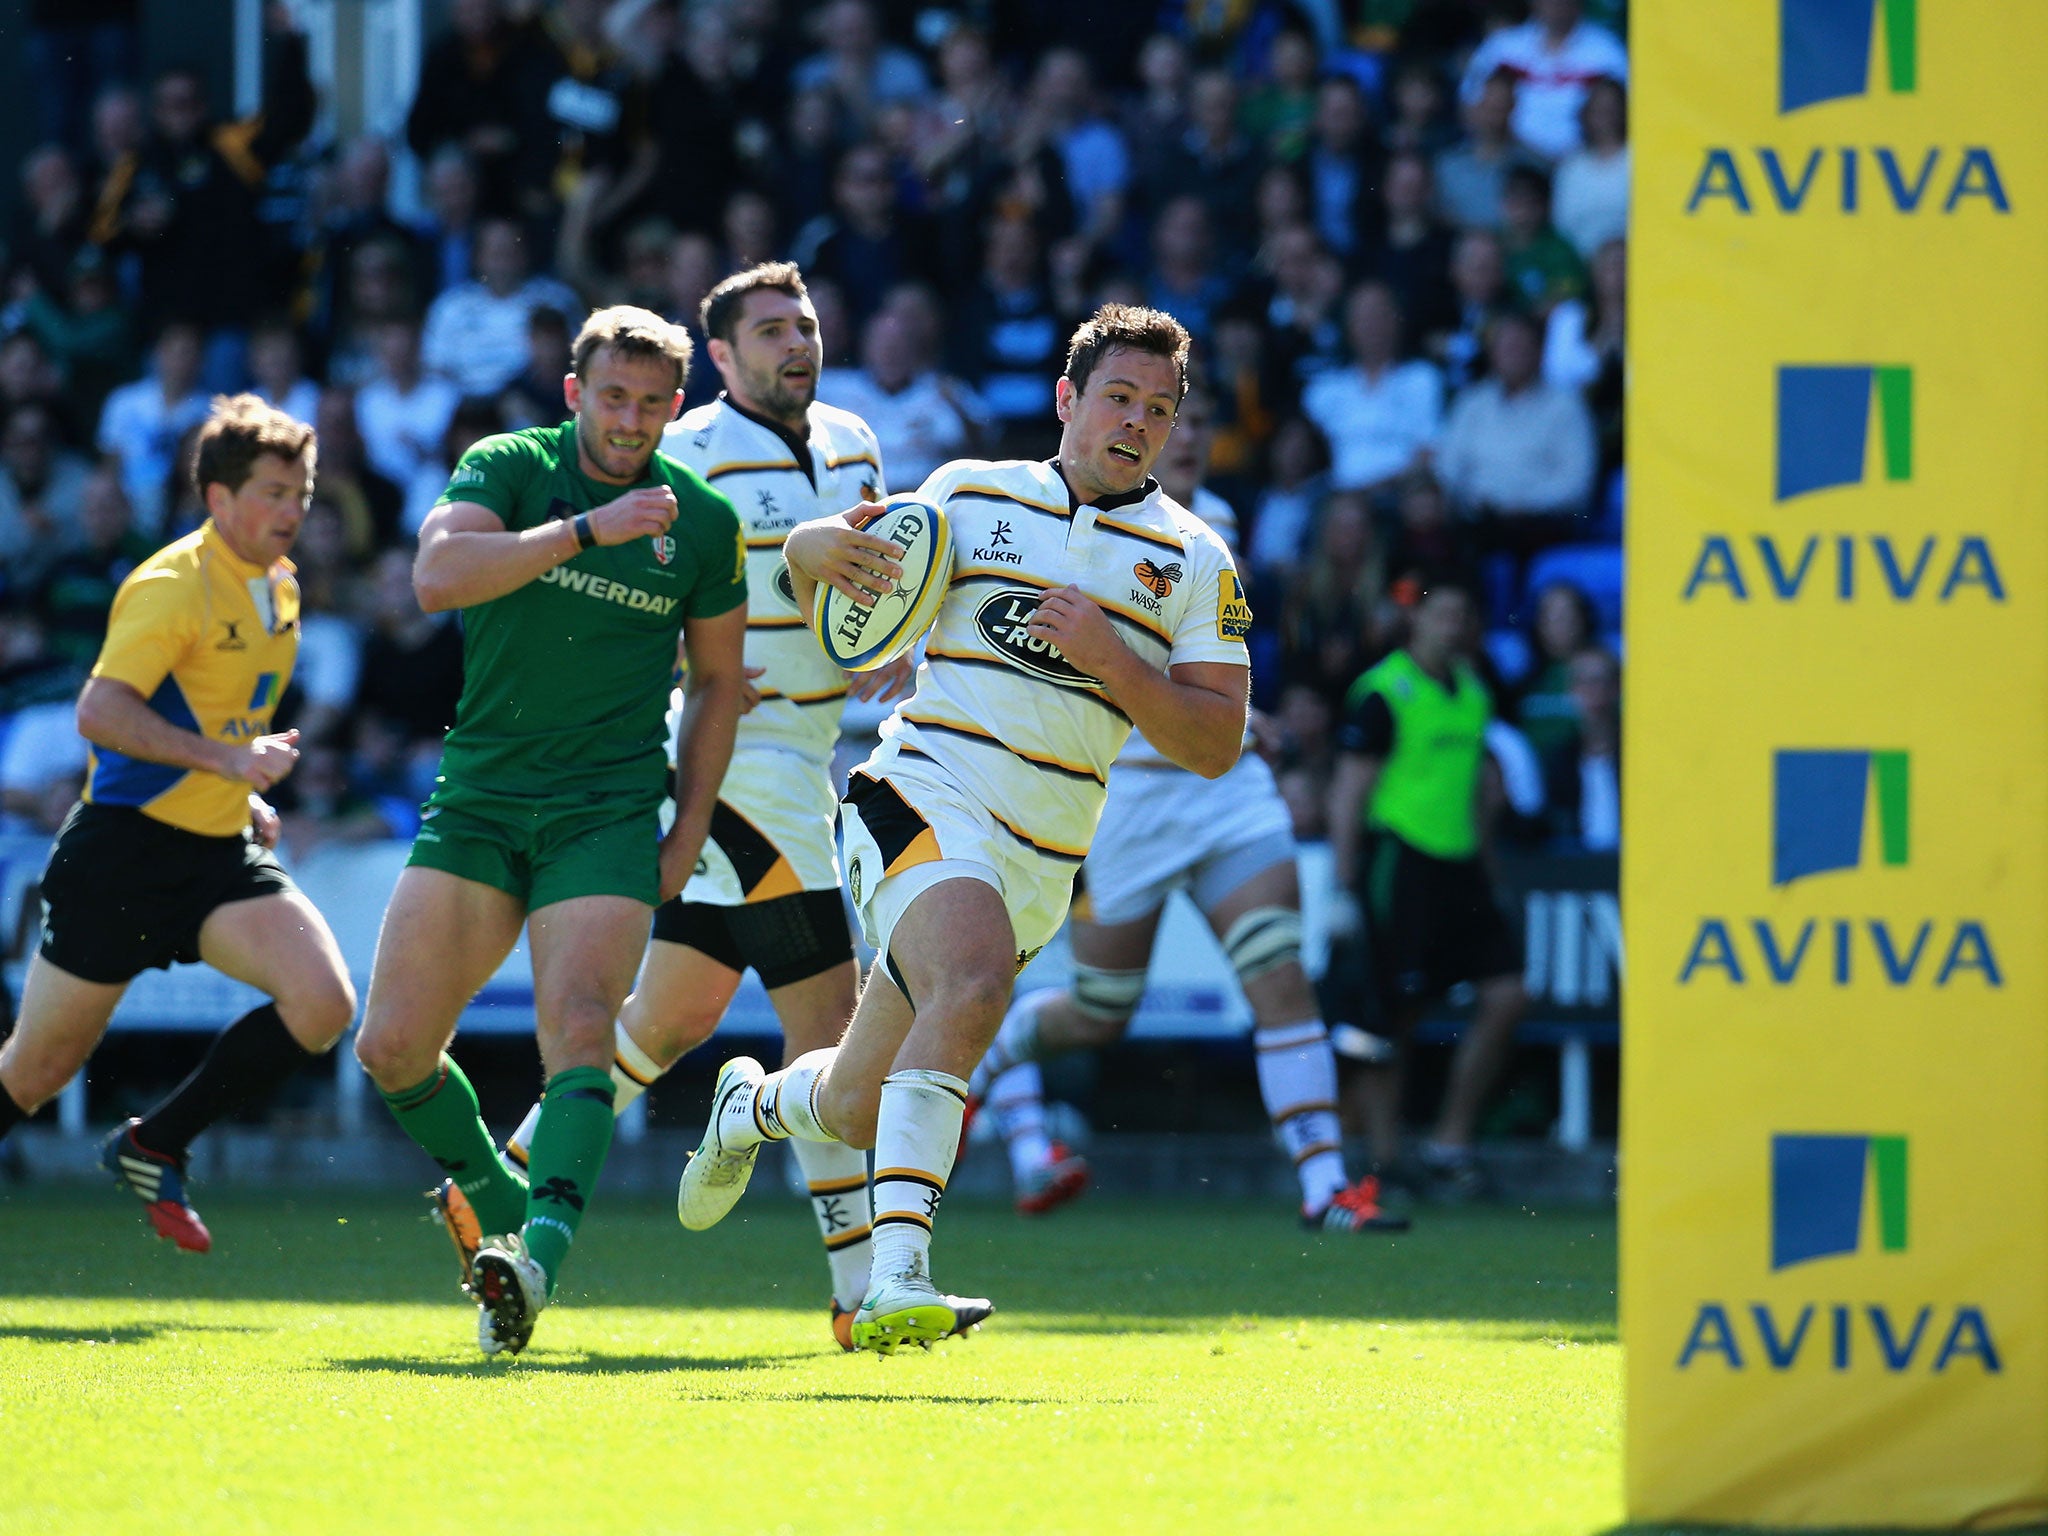 Rob Miller runs in for a try for Wasps